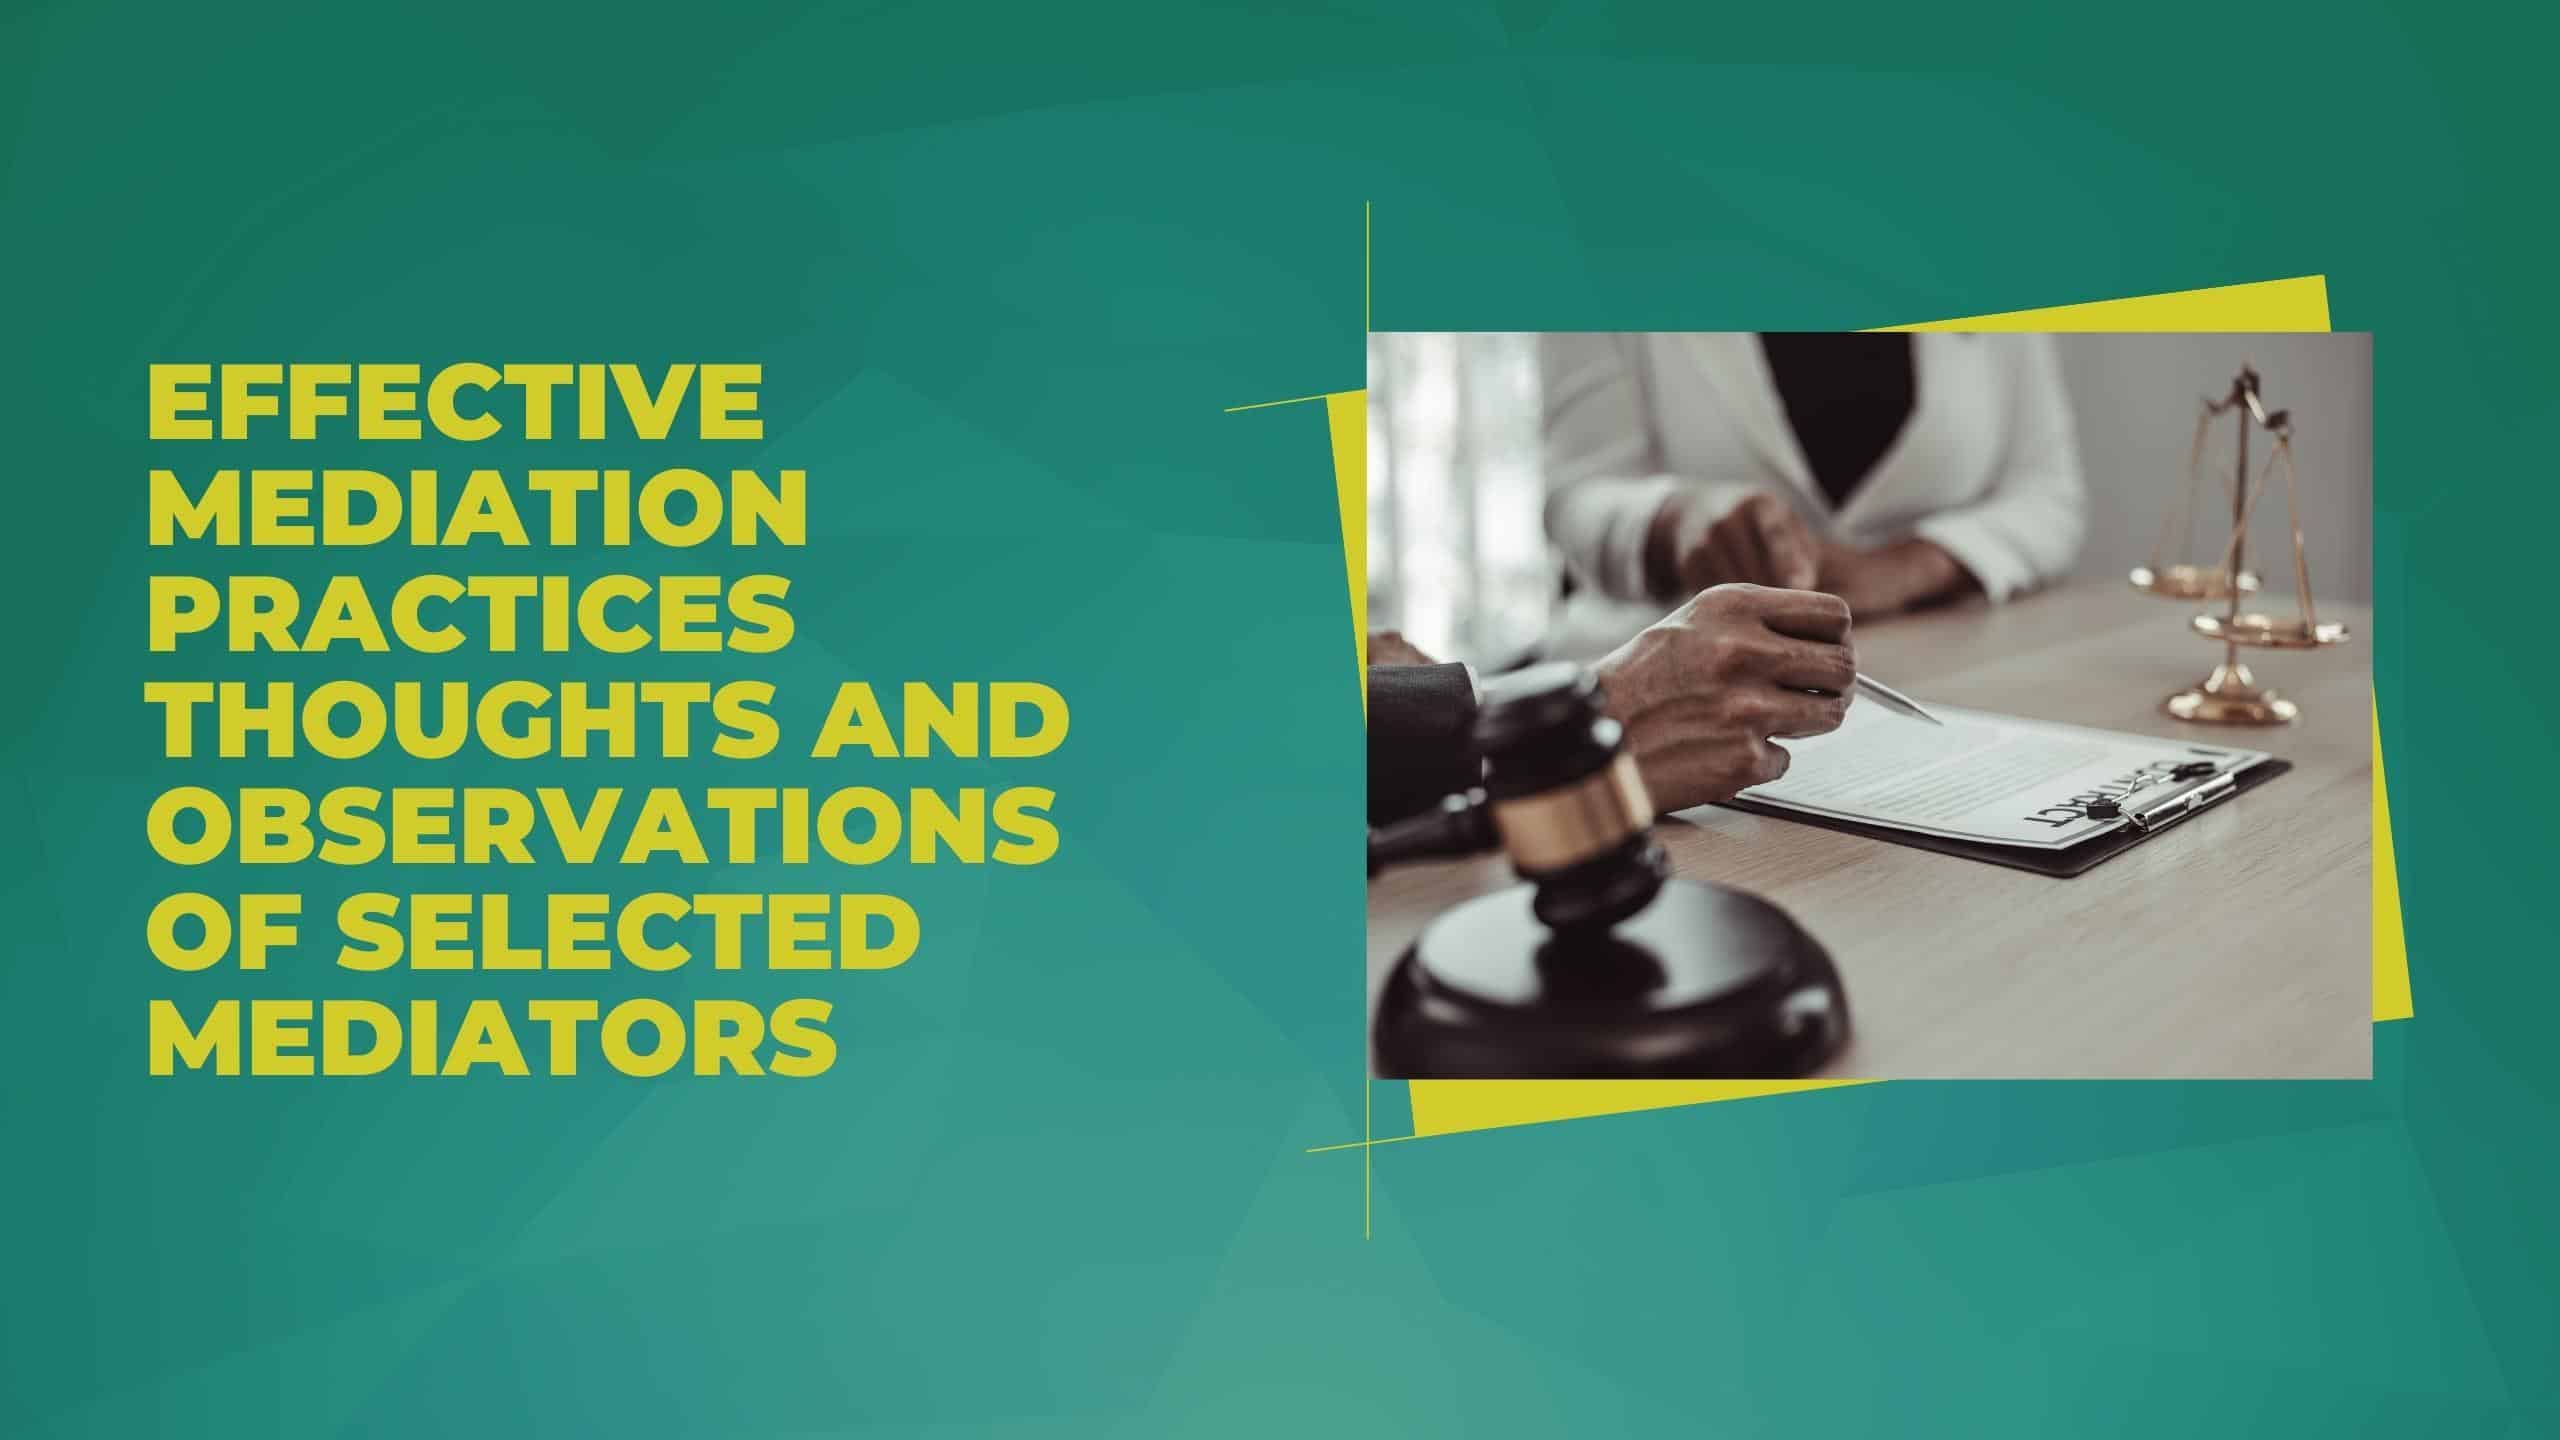 Effective Mediation Practices Thoughts and Observations of Selected Mediators